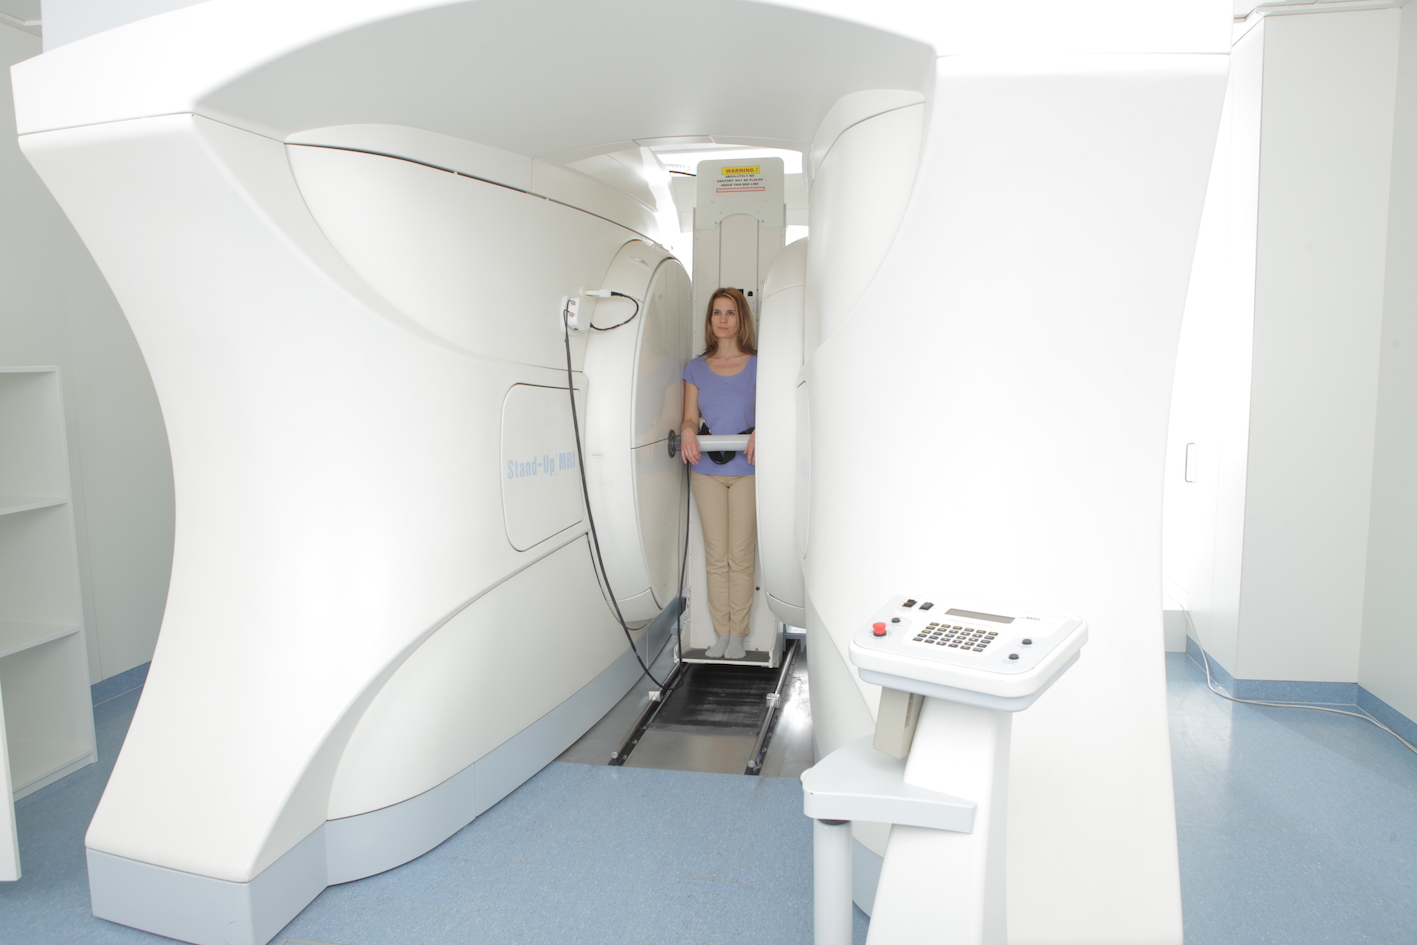 pediatric radiology in New Jersey